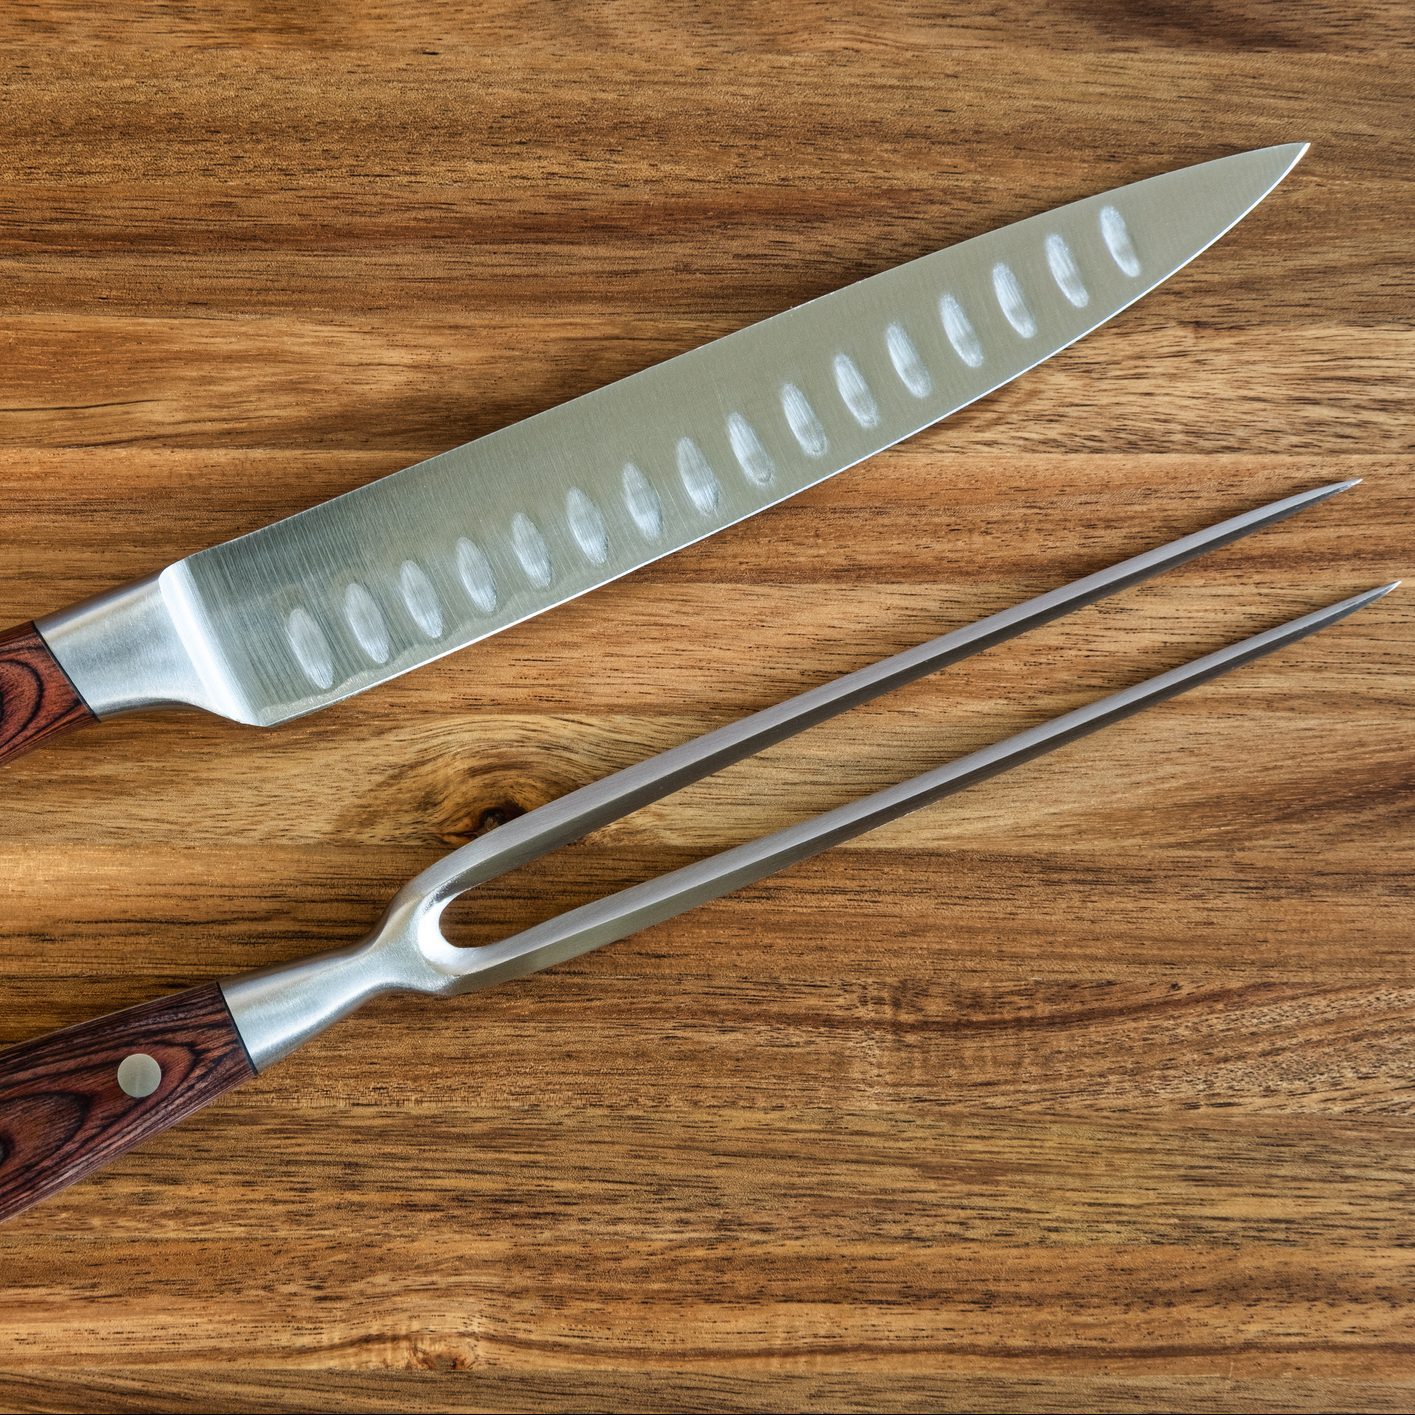 a knife and fork meat carving set on a wooden cutting board